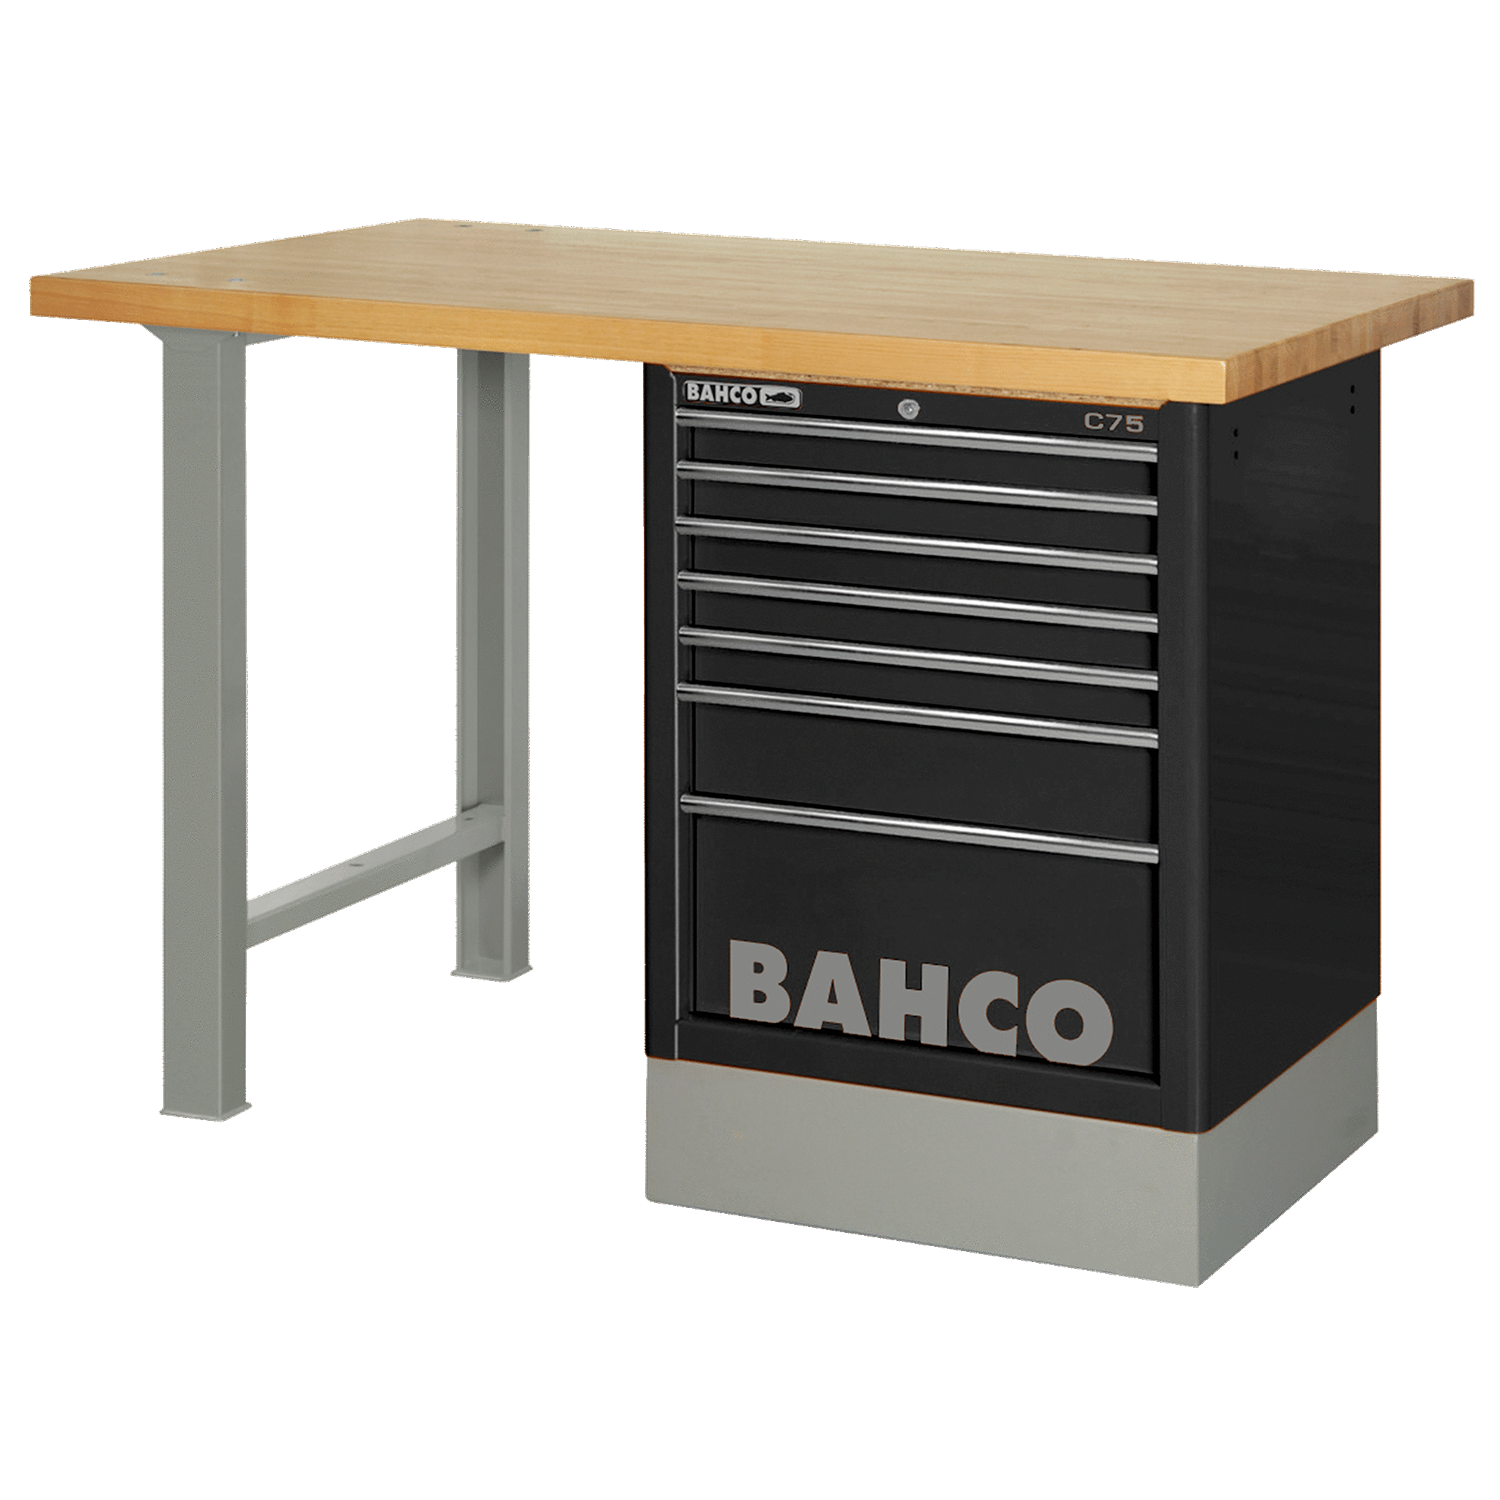 BAHCO 1495KCWB18TW Heavy Duty Wooden Top Workbenches with Drawer - Premium Workbench from BAHCO - Shop now at Yew Aik.